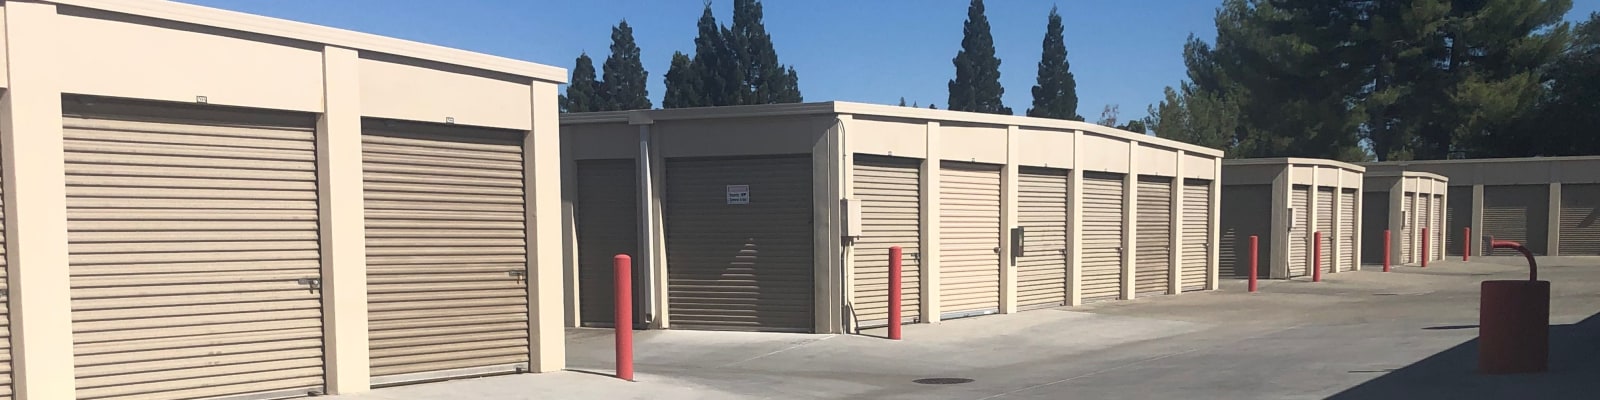 Reviews of Gold Country Self Storage in Folsom, California